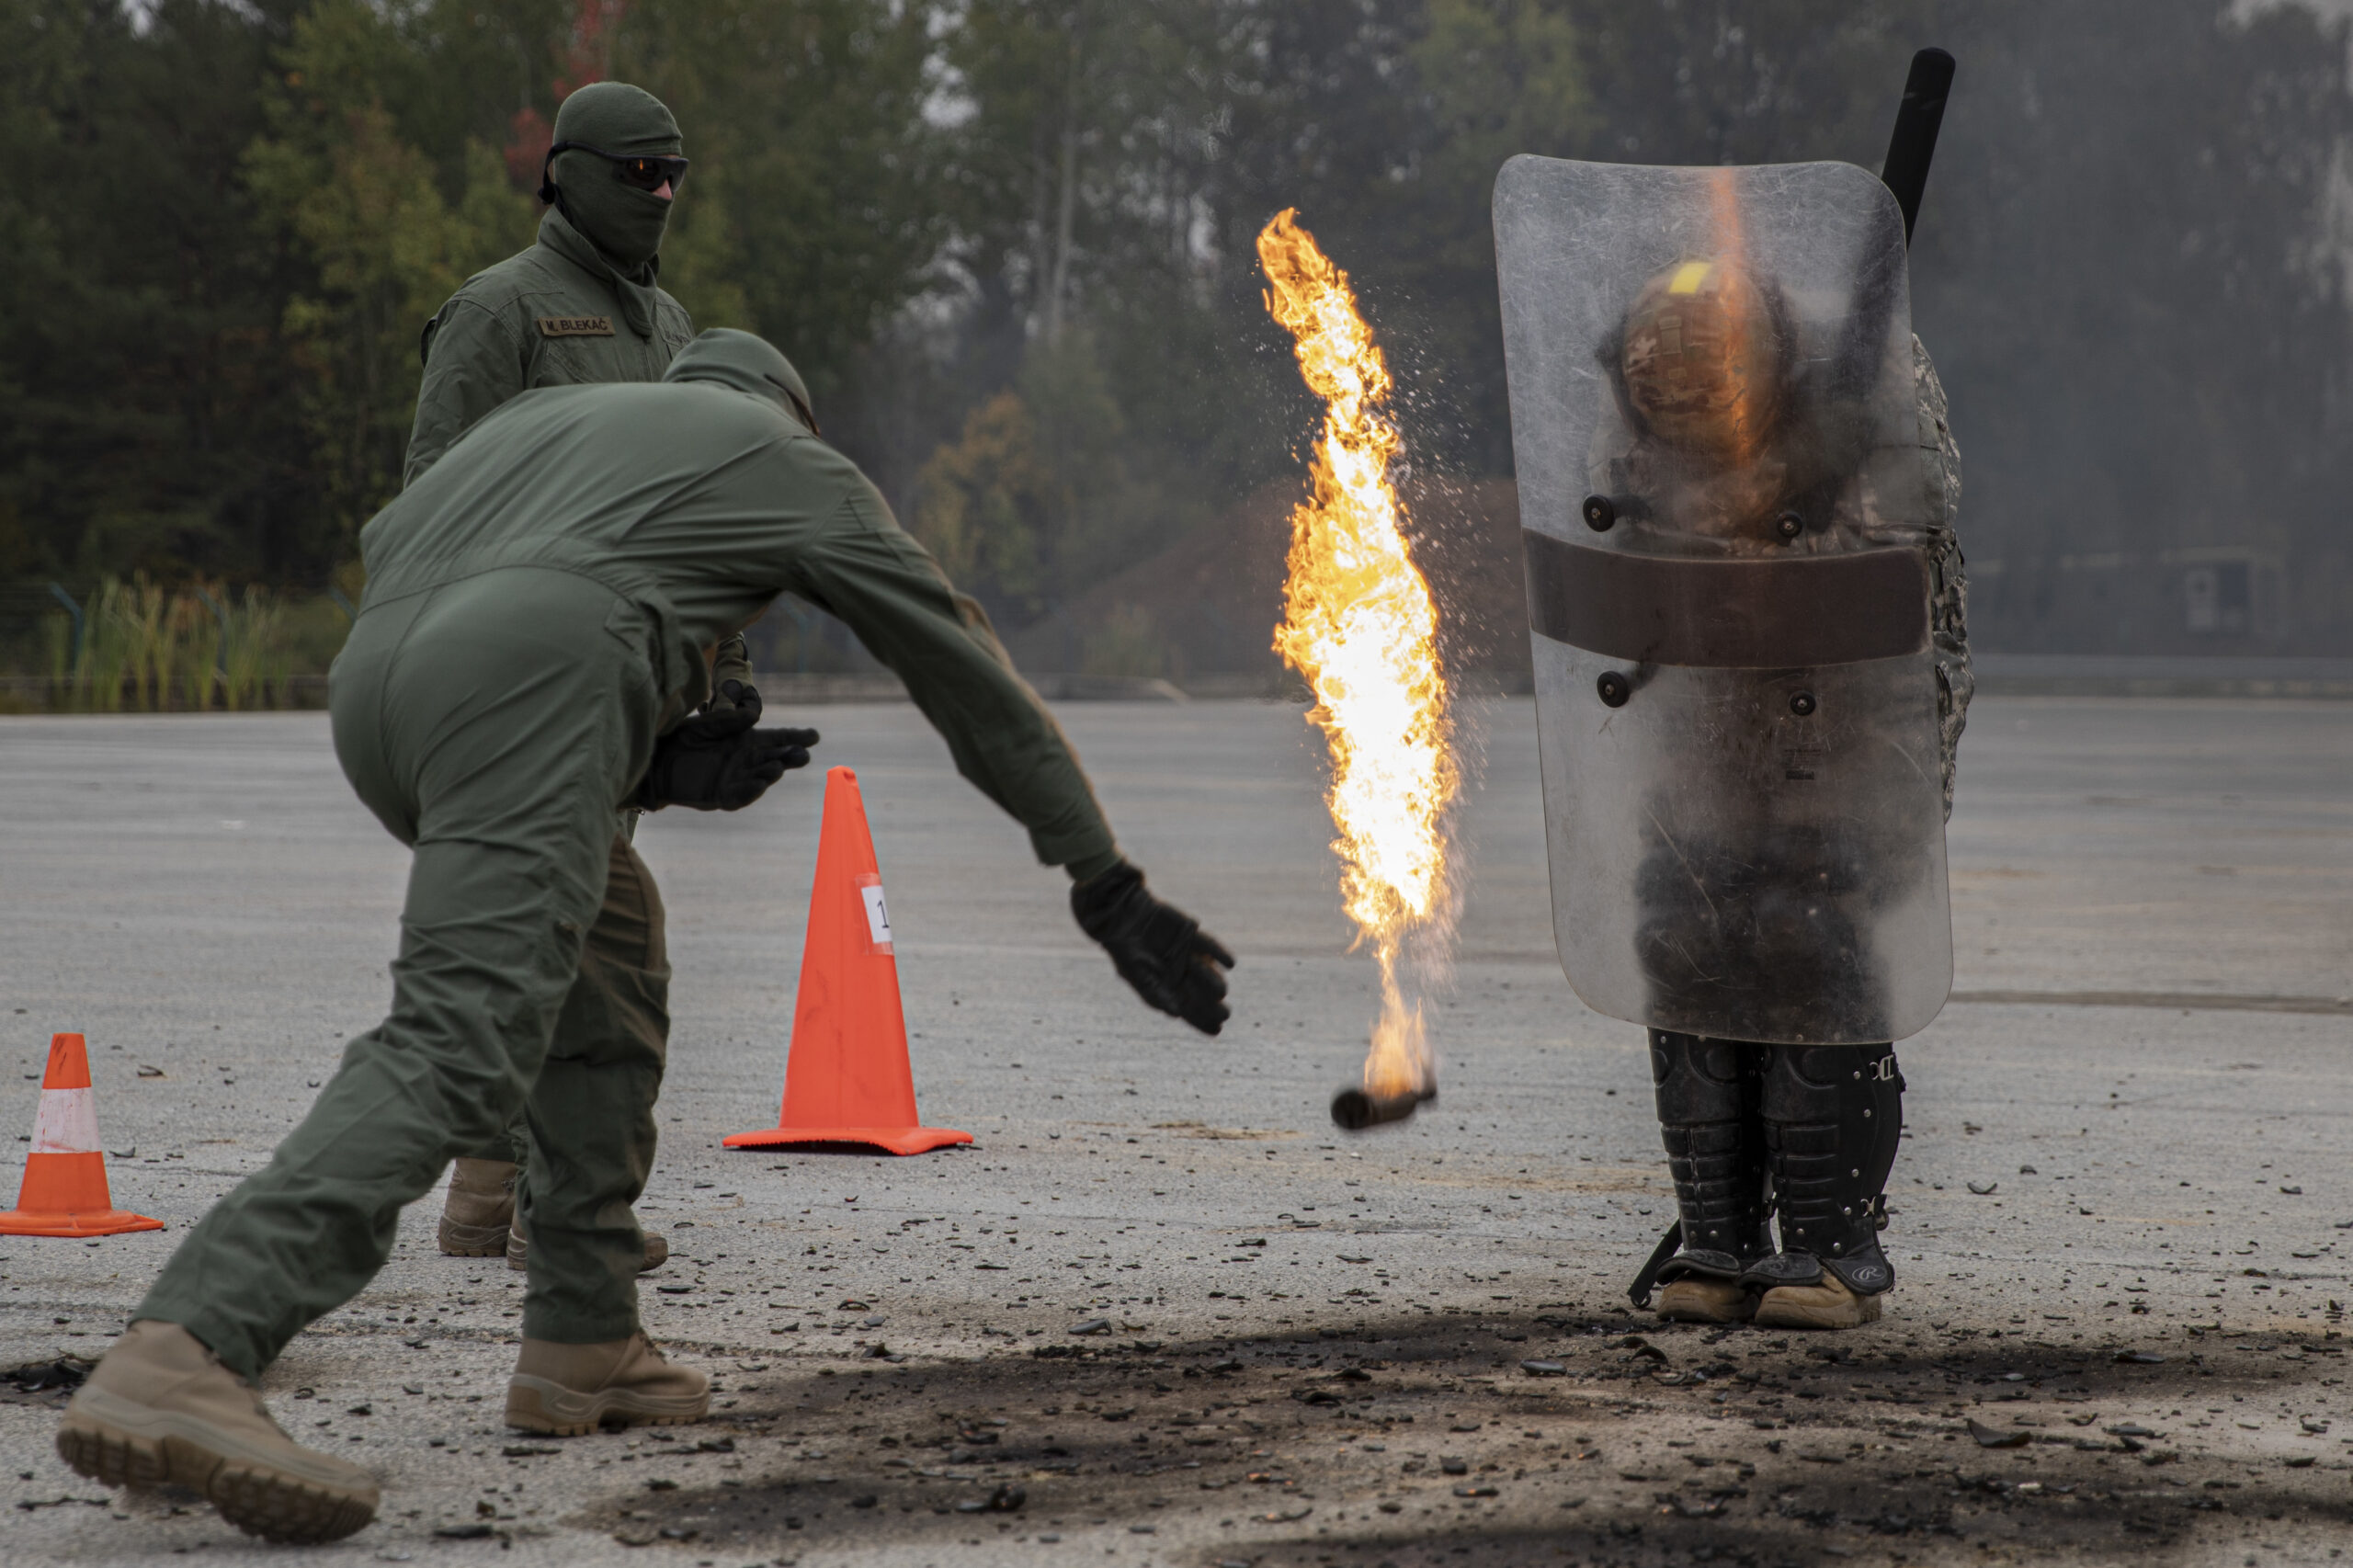 Soldiers of 2-151st Infantry Battalion “Task Force Nighthawk” continue the third day of crowd riot control training as they react to molotov cocktails being thrown at their feet, during a Kosovo Force (KFOR) mission rehearsal exercise, at the Joint Multinational Readiness Center, in Hohenfels, Germany, Oct. 8, 2022. KFOR 31 is a multinational training event conducted to prepare units for their deployment to the Kosovo Regional Command East. (U.S. Army photos by Staff Sgt. Anna Pongo)